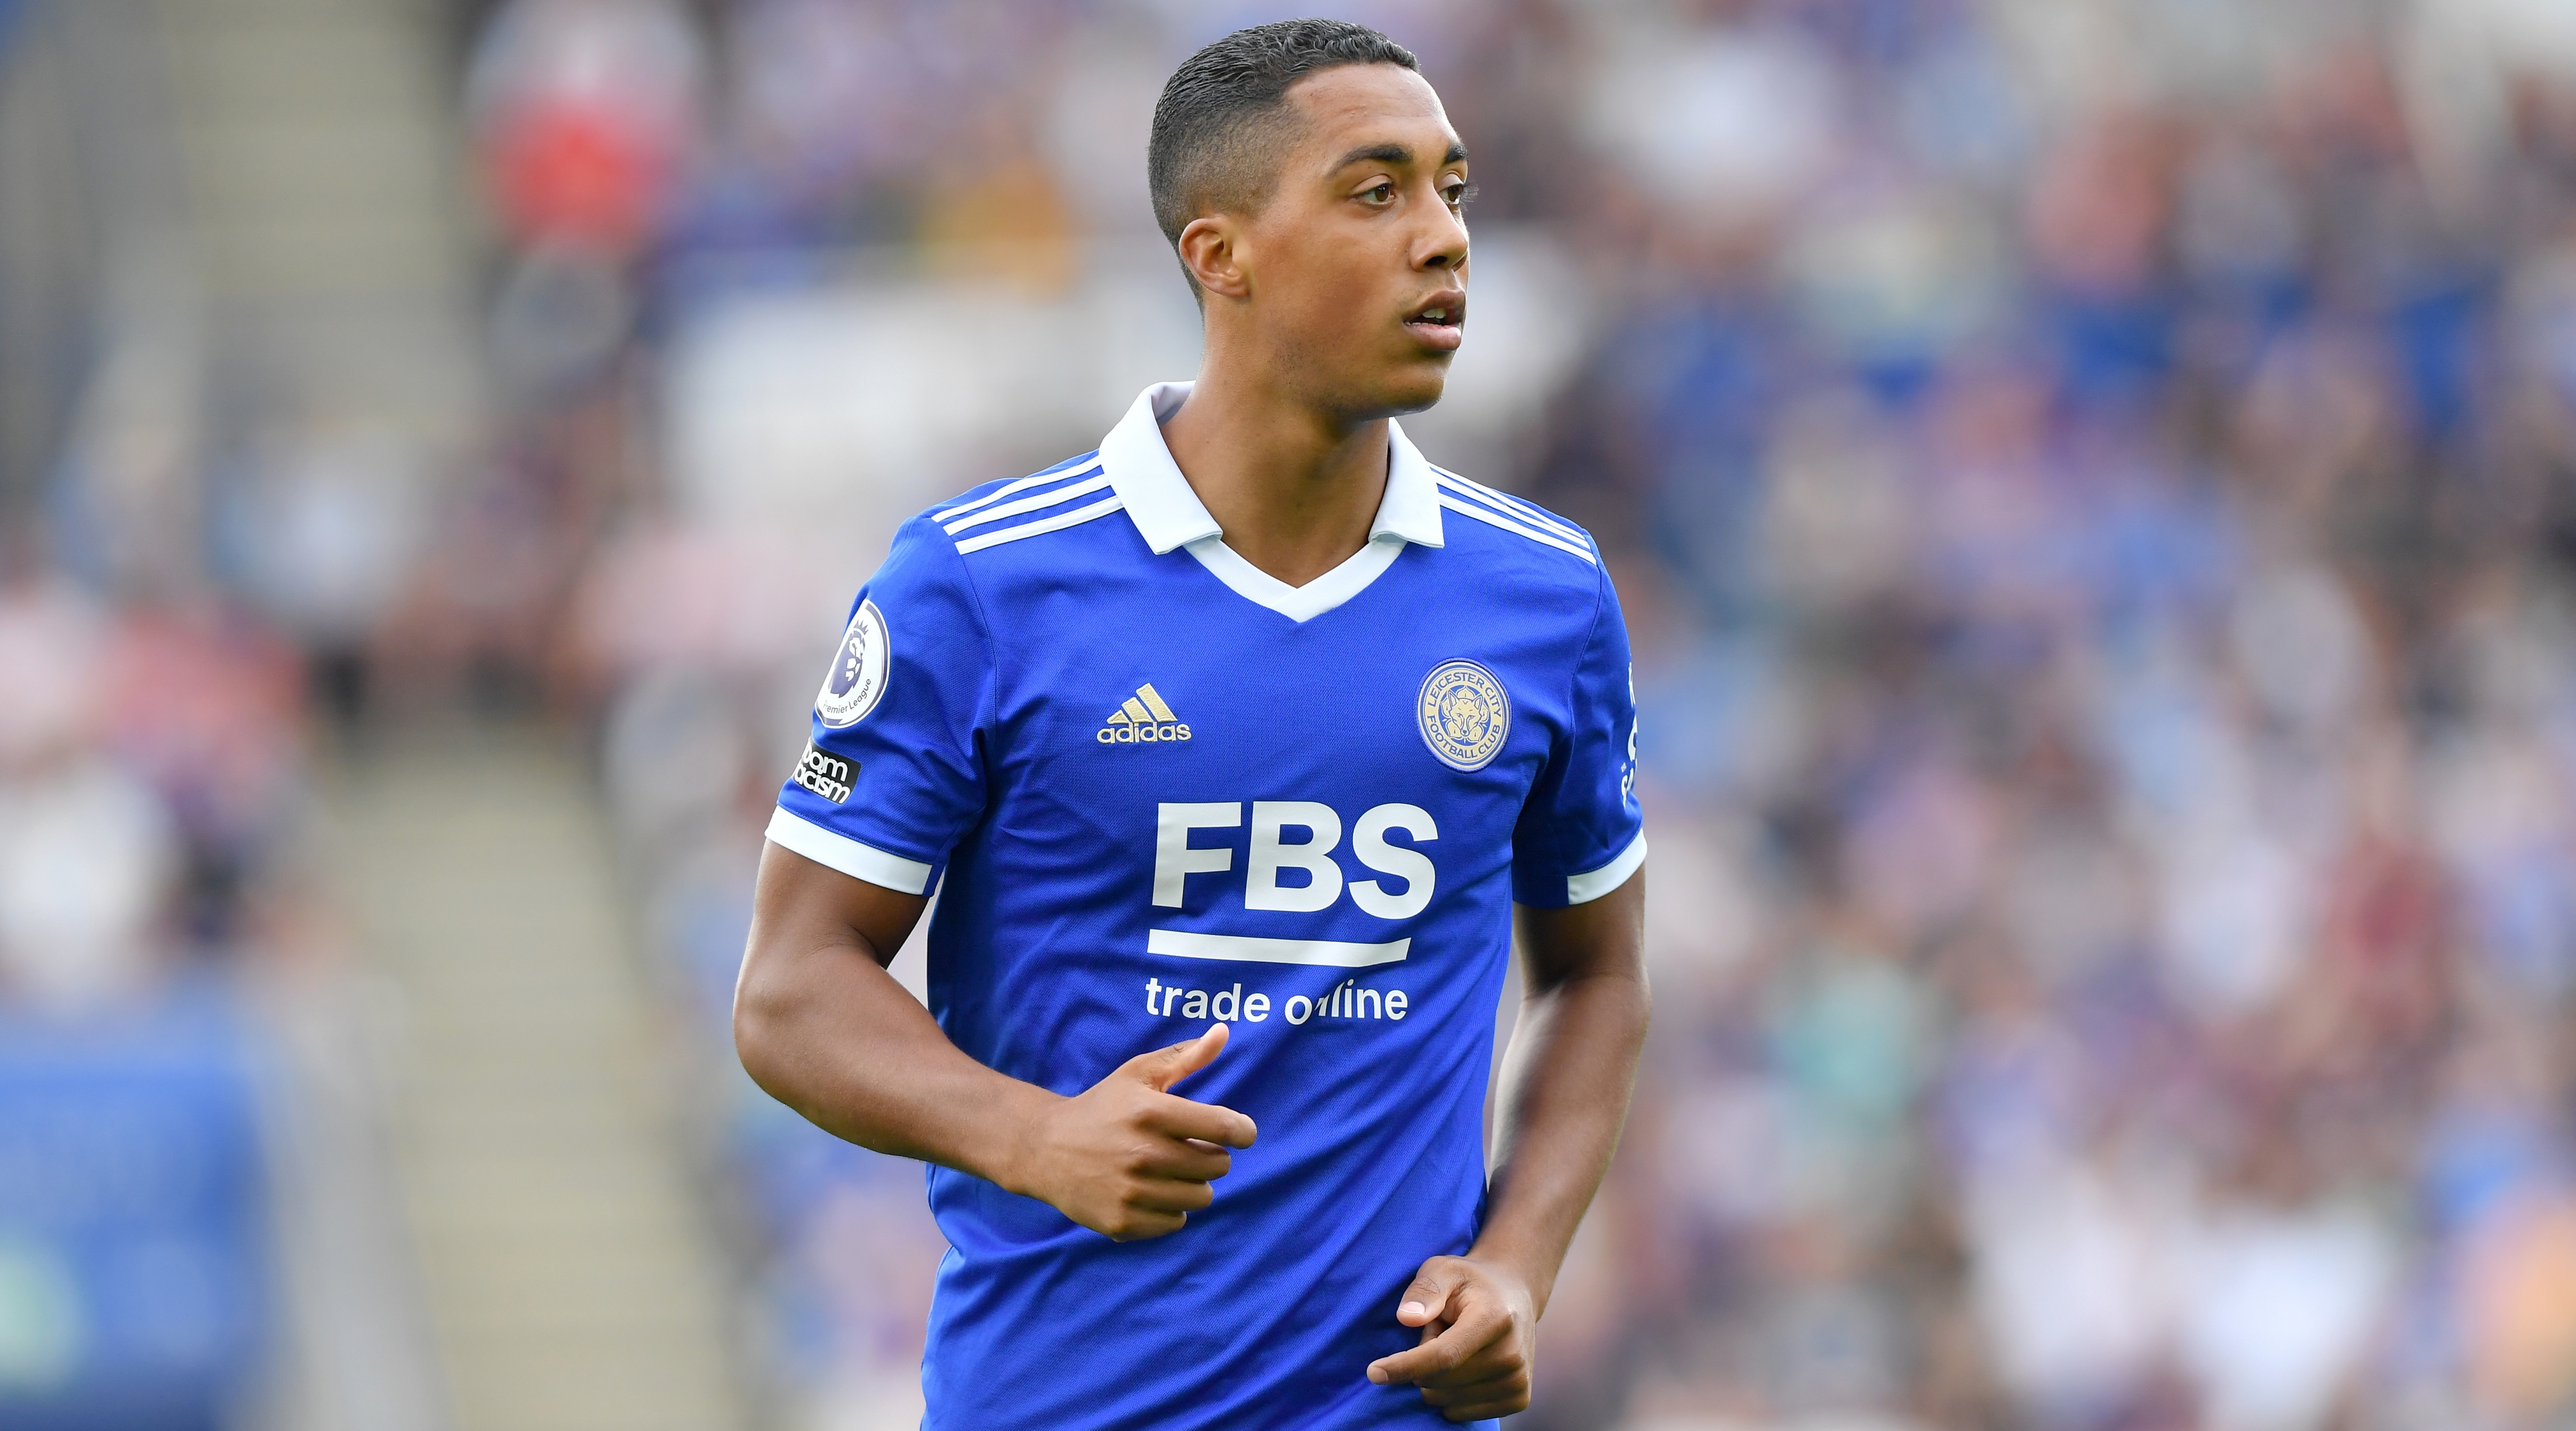 Leicester City midfielder Youri Tielemans during a friendky match